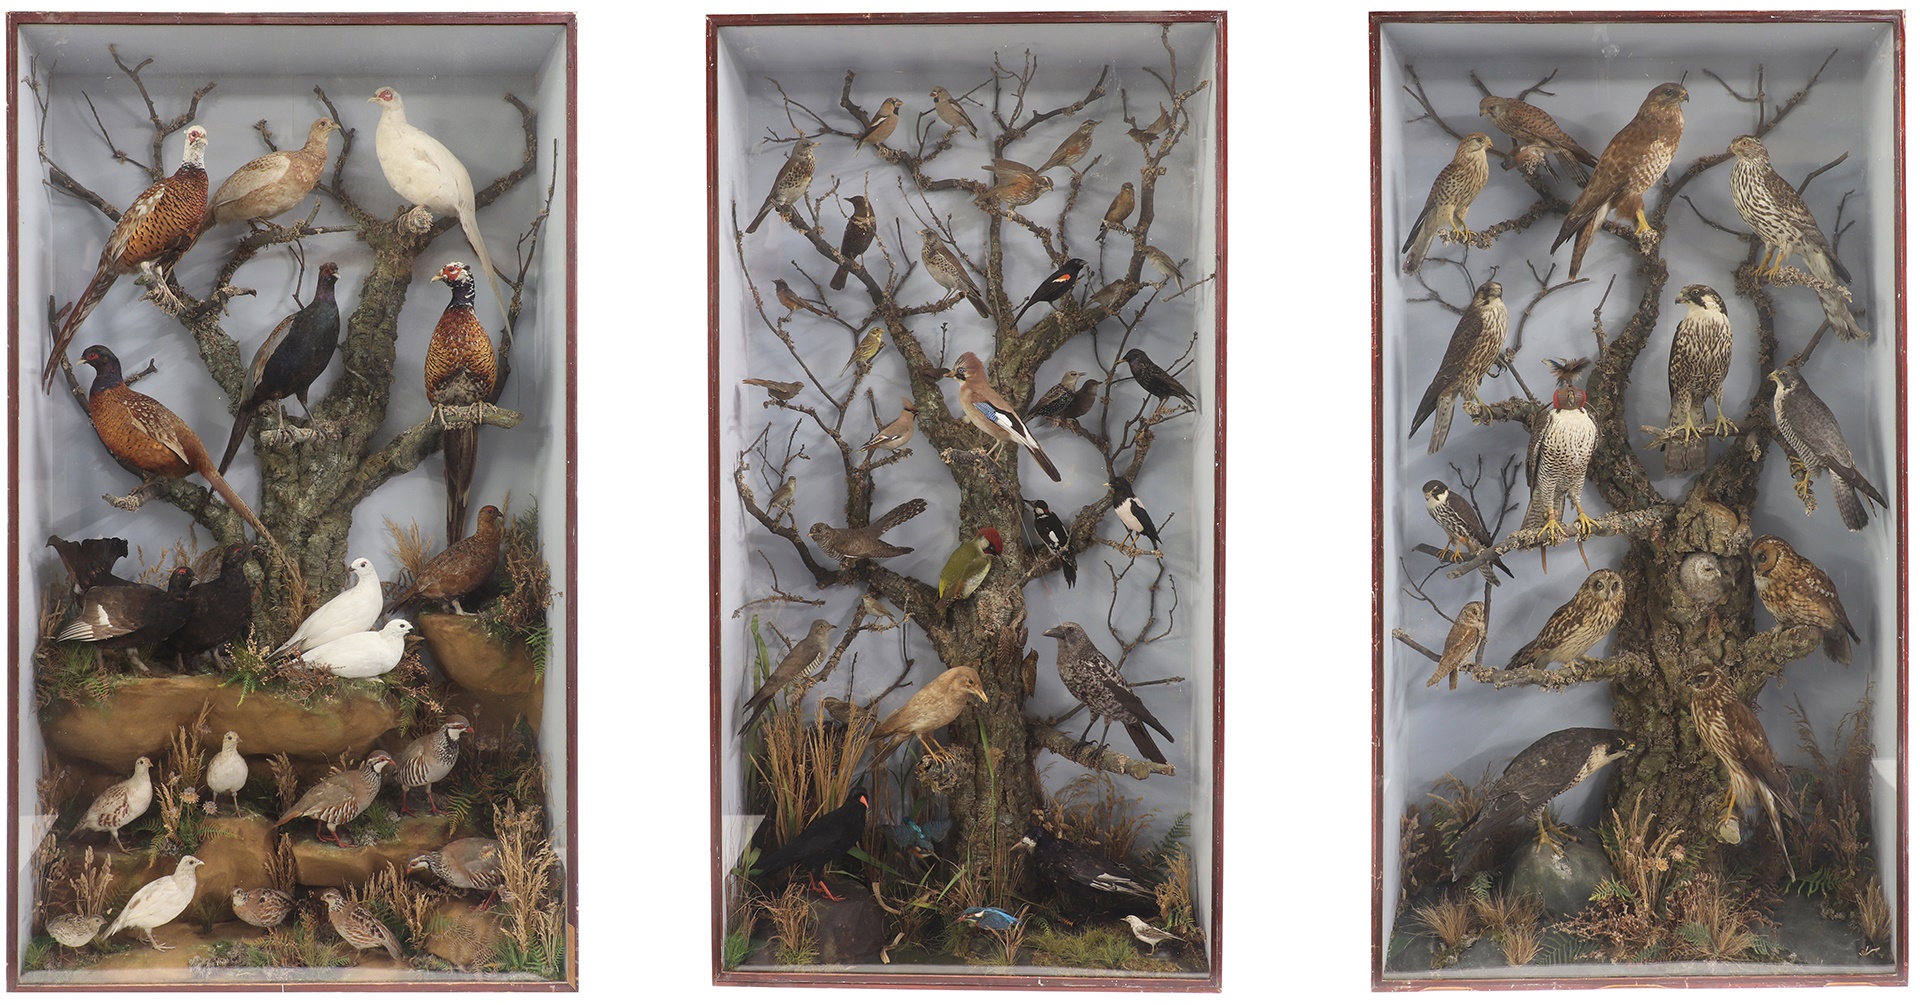 Three Large Taxidermy Displays From Our 30 January Homes & Interiors Sale. All estimated at (£1,500-2,500)